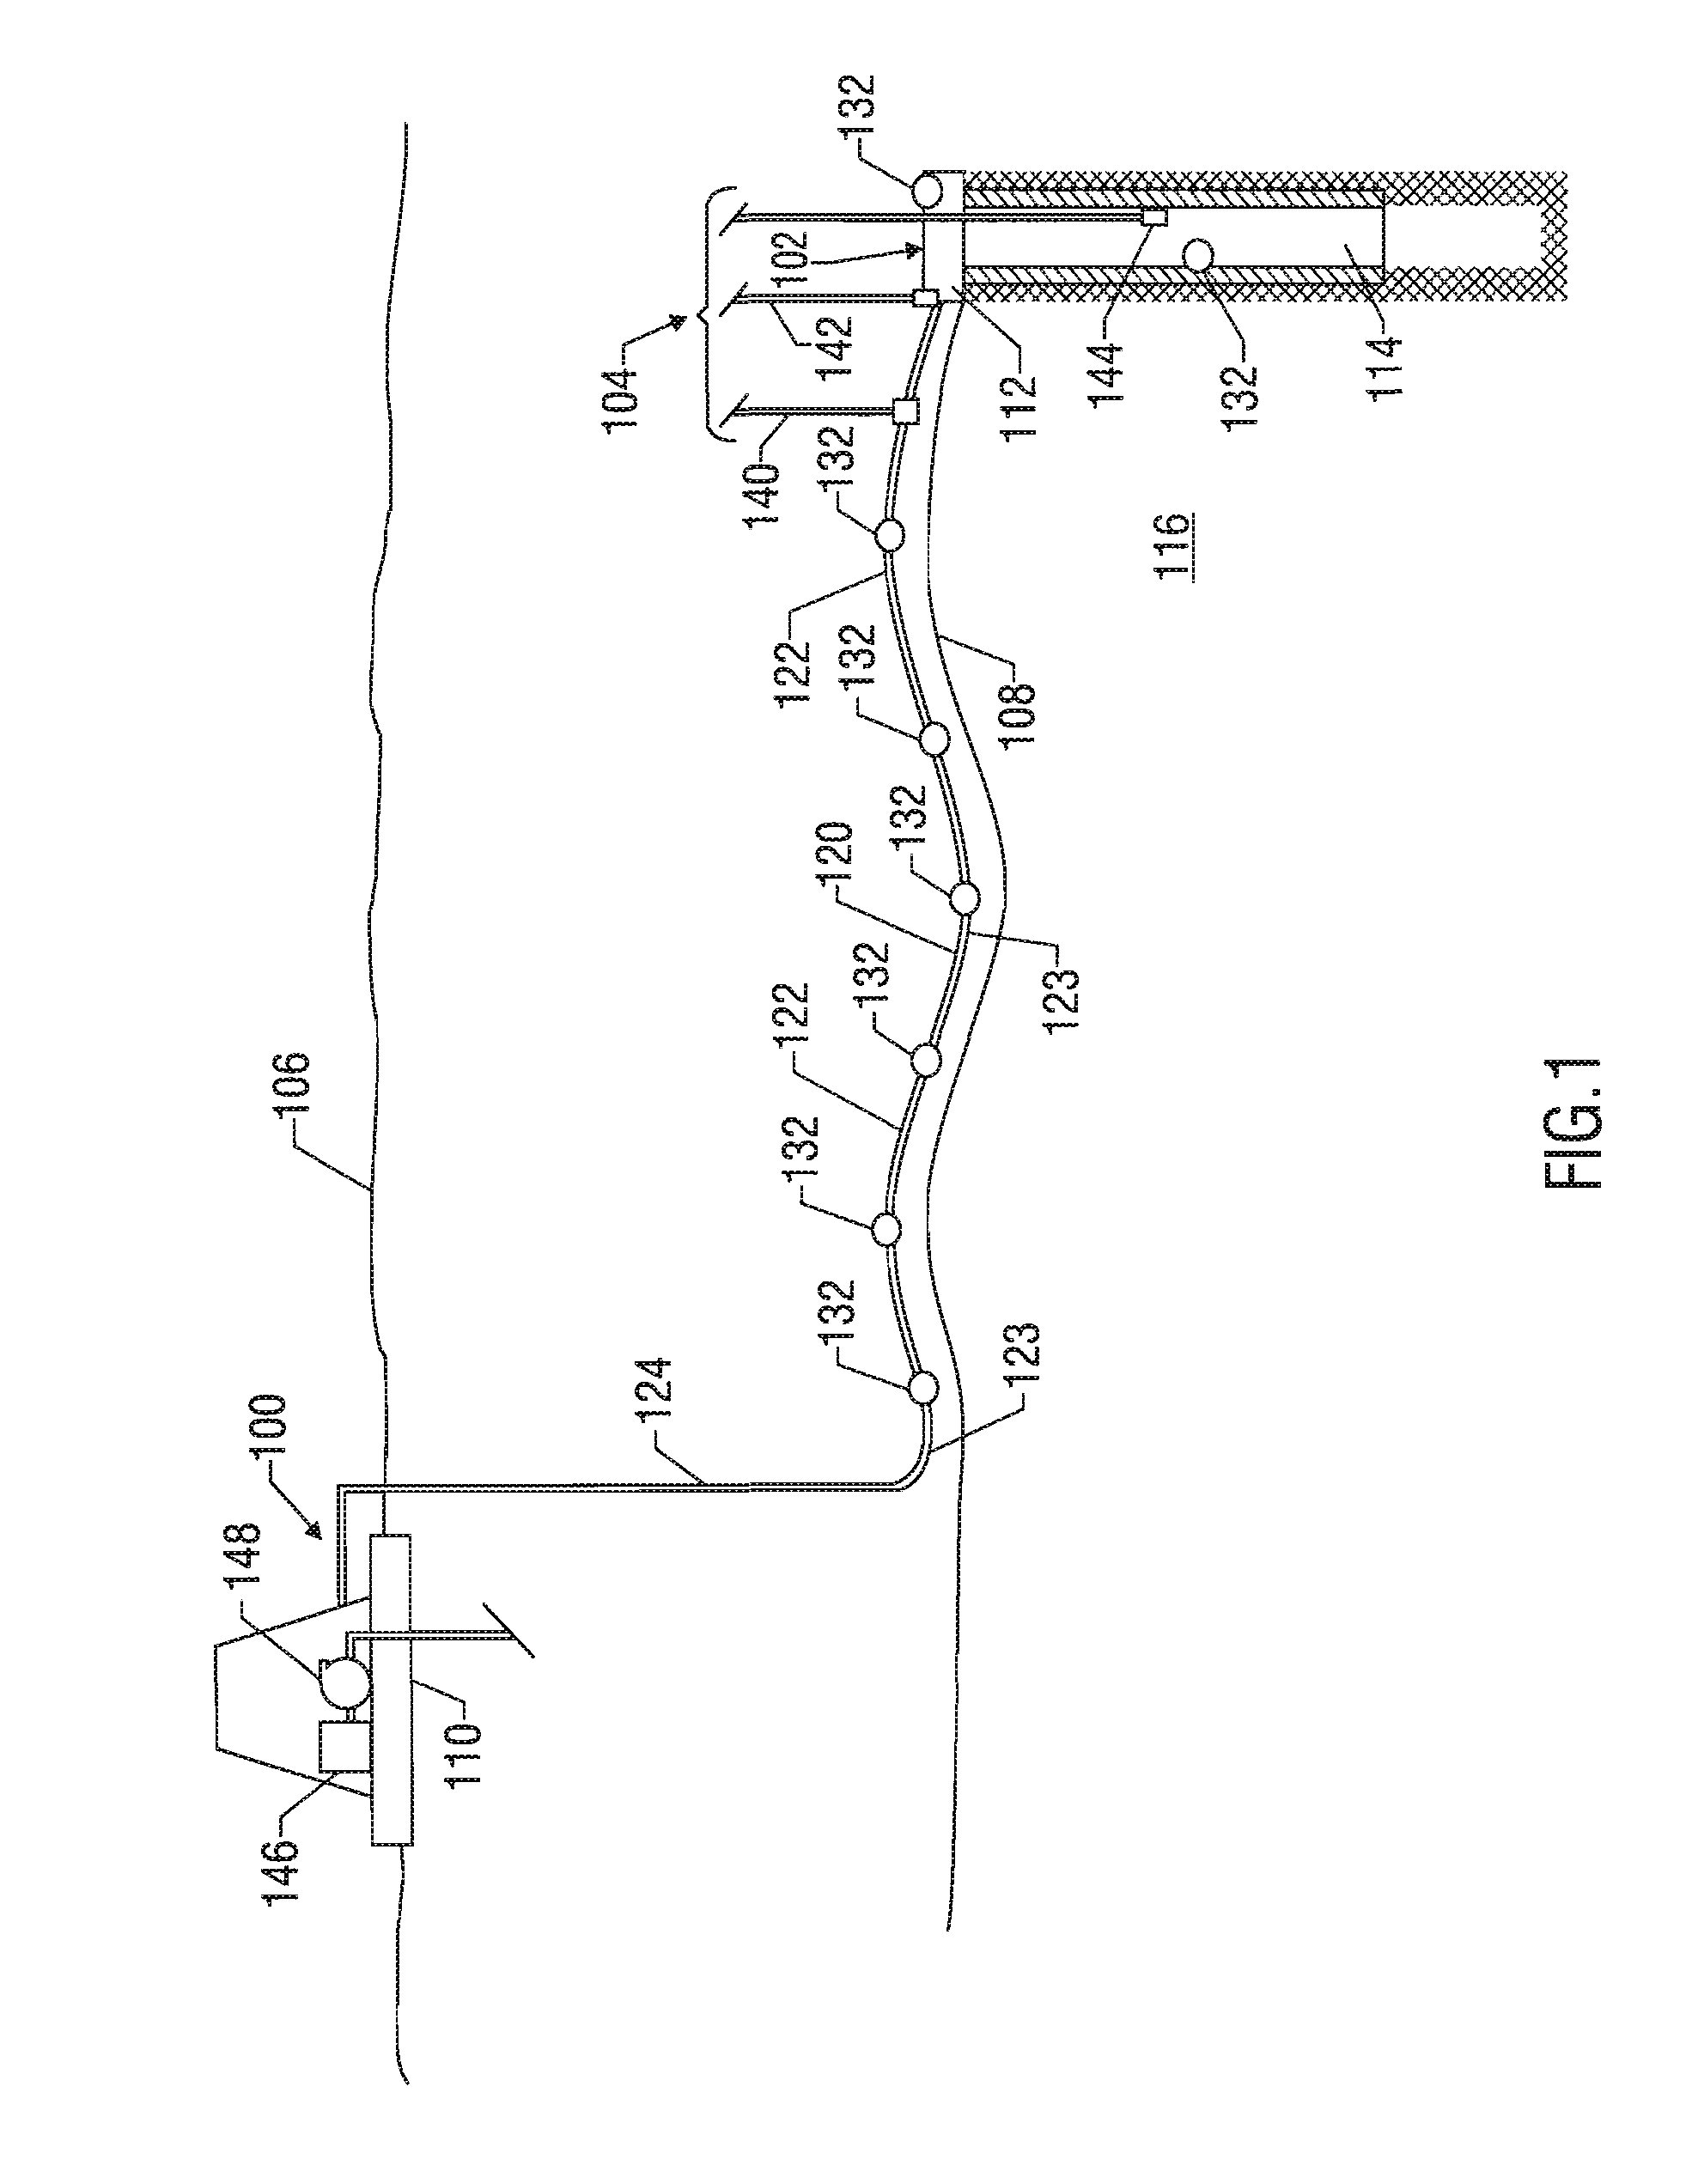 Method and apparatus for preventing slug flow in pipelines